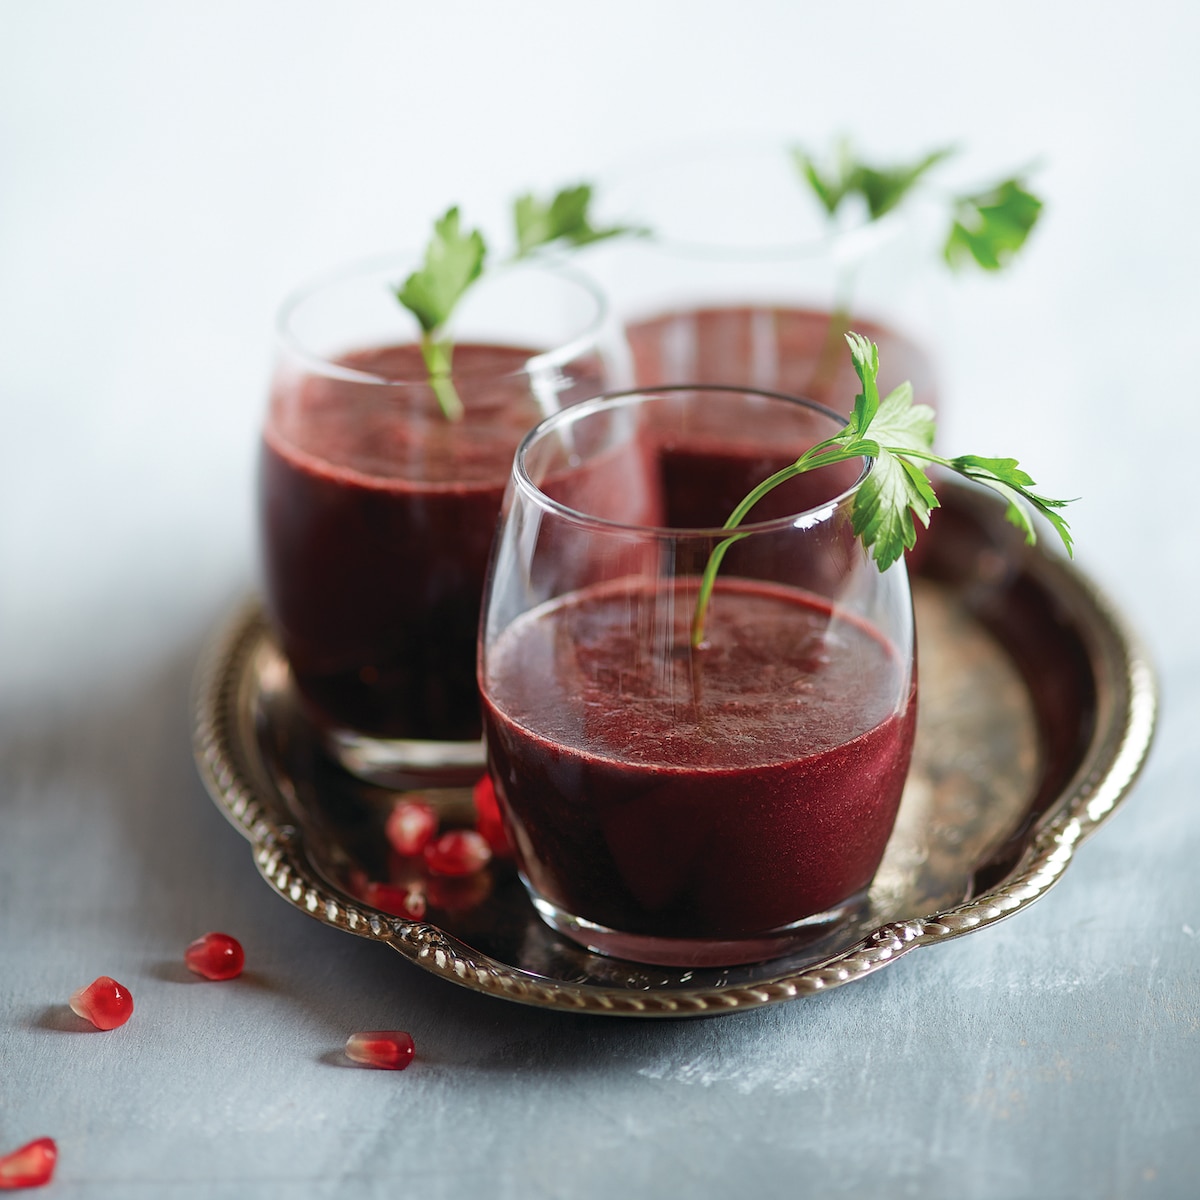 Dance to the beet smoothie